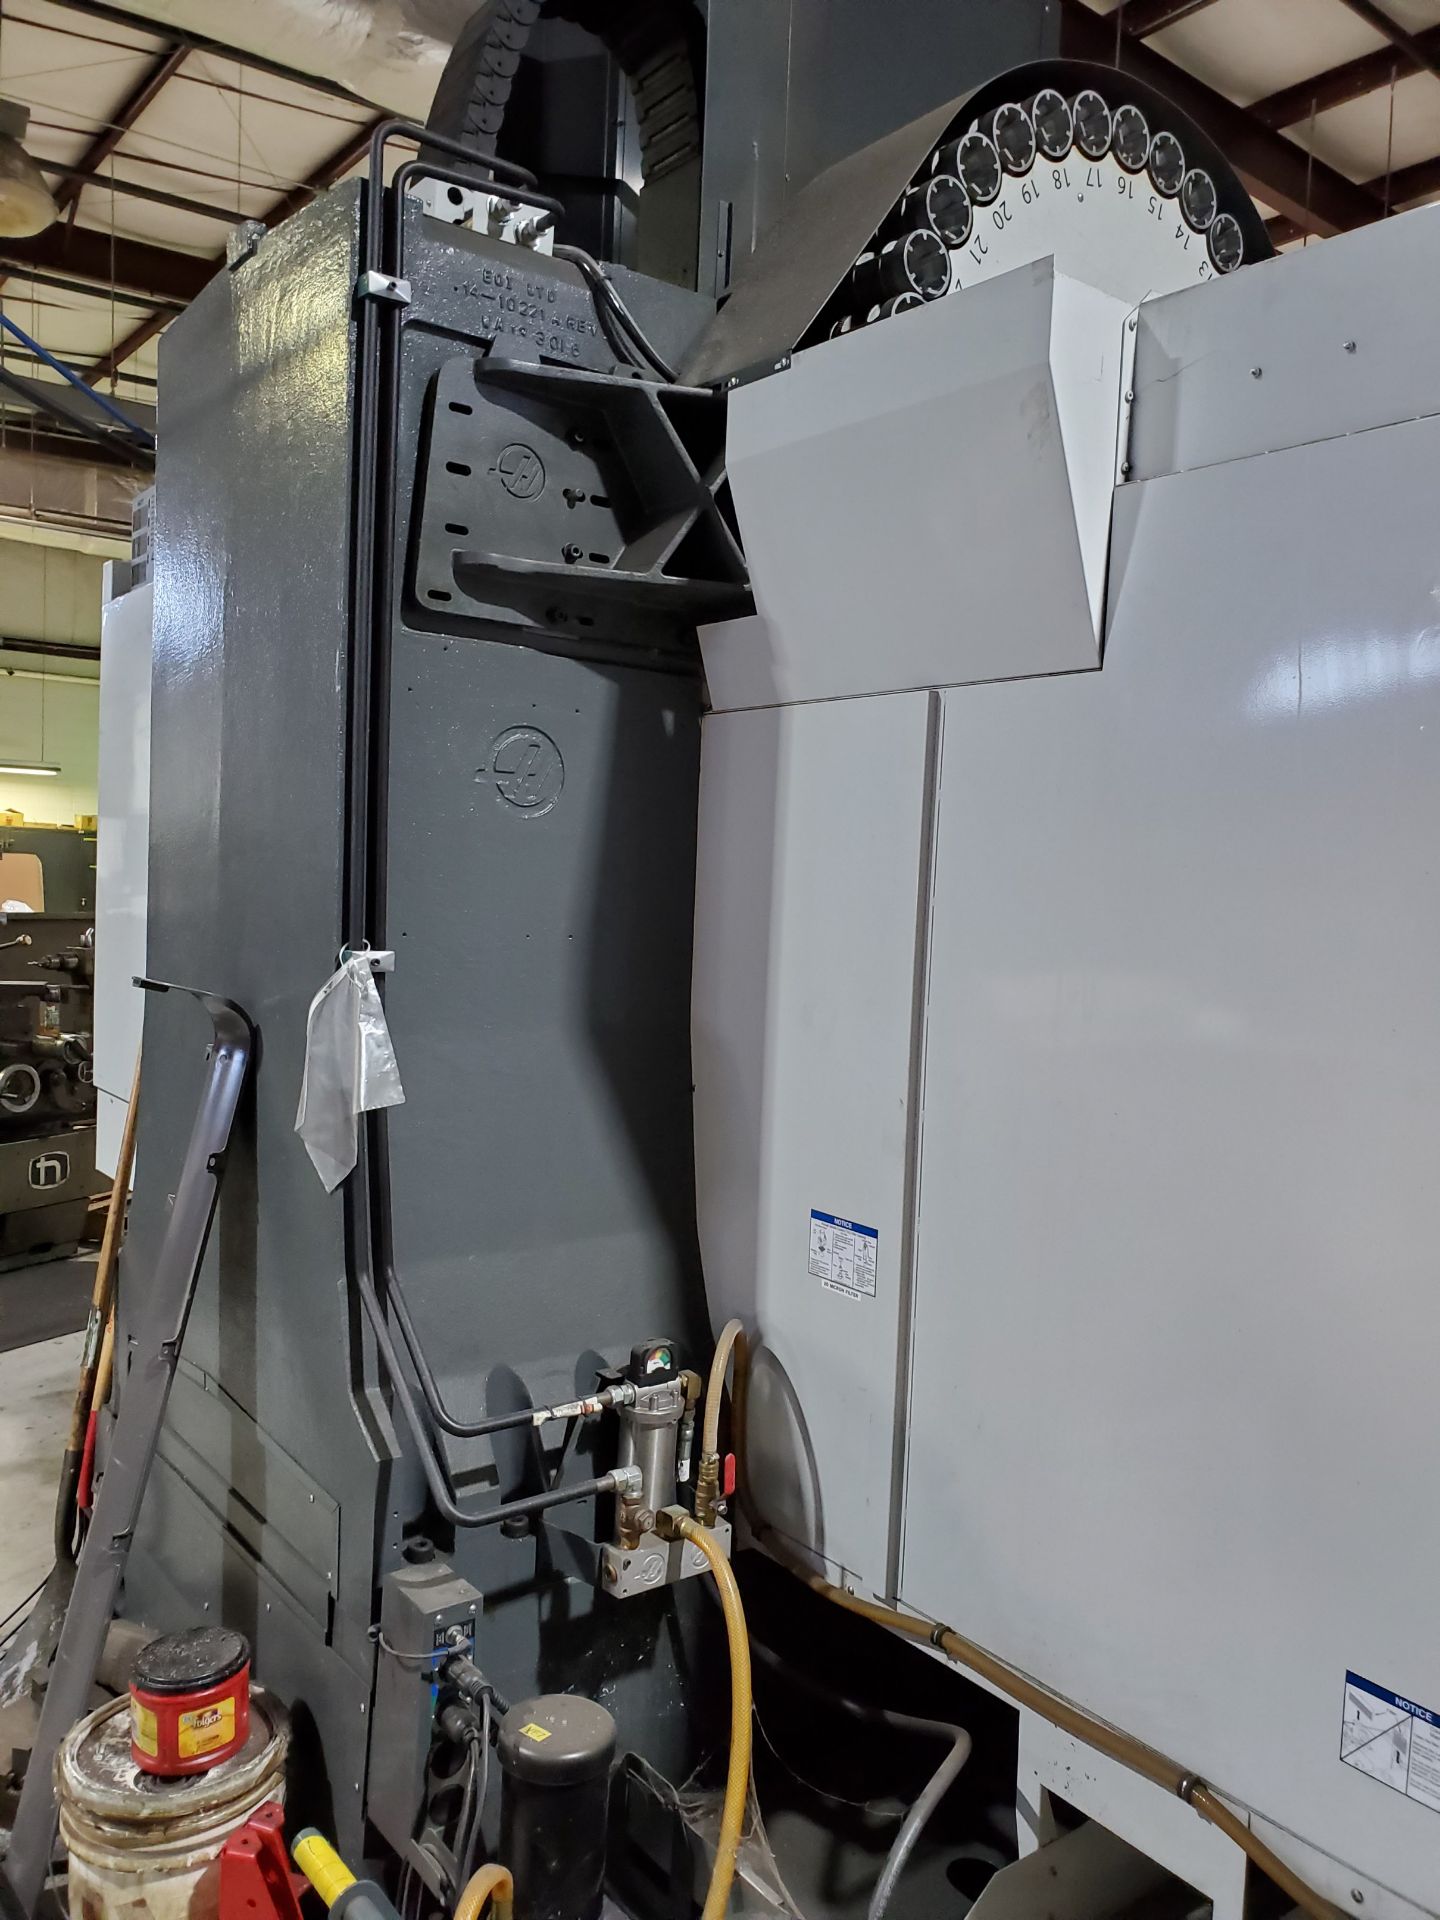 2013 HAAS VF7 CNC VERTICAL MACHINING CENTER, S/N 1104319, 84'' X 28'' TABLE, THROUGH SPINDLE COOLANT - Image 21 of 27